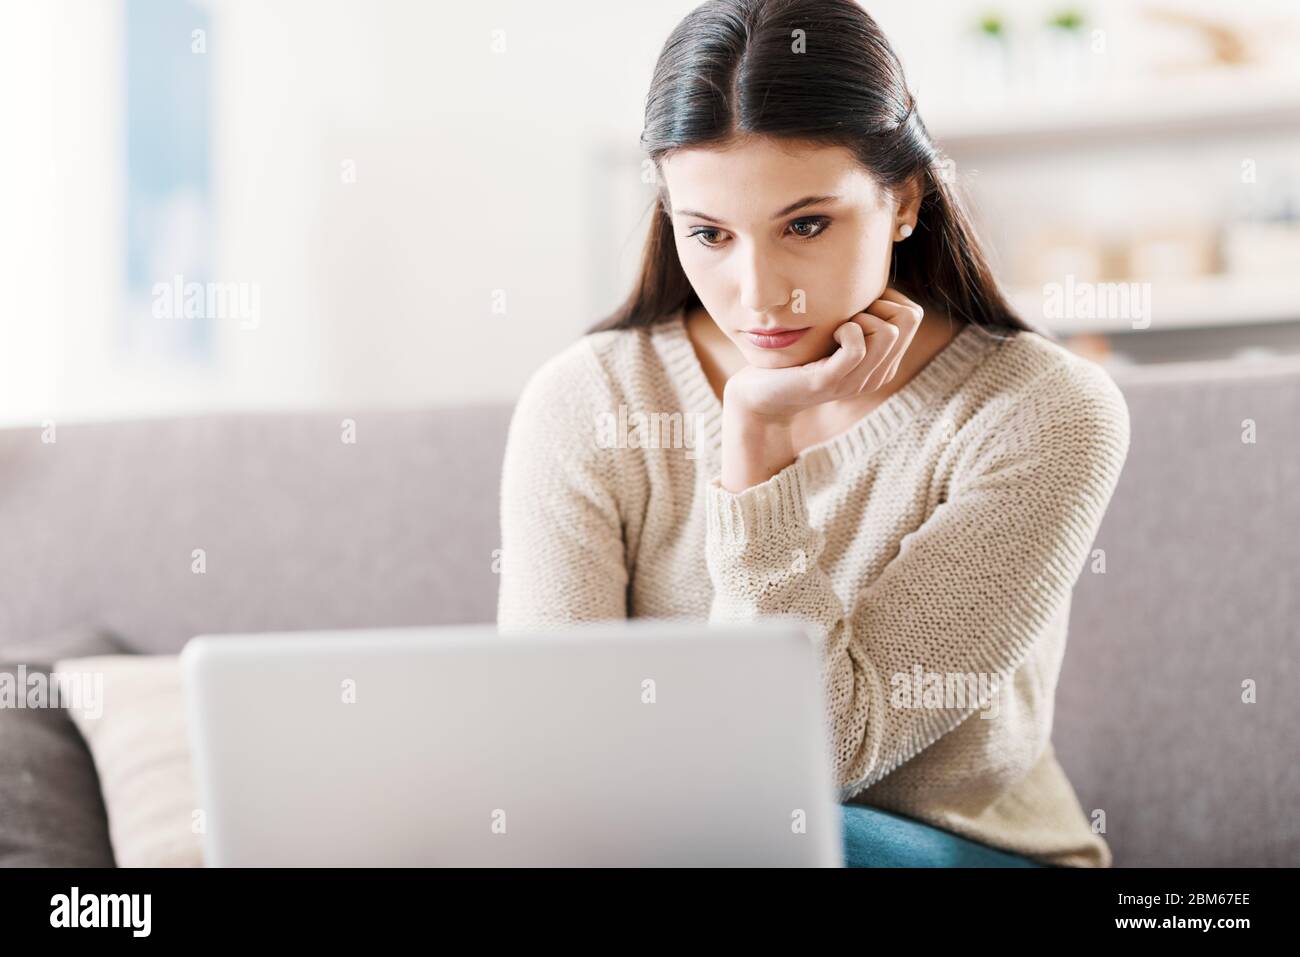 Girl relaxing on the couch at home and using a laptop, technology and communication concept Stock Photo